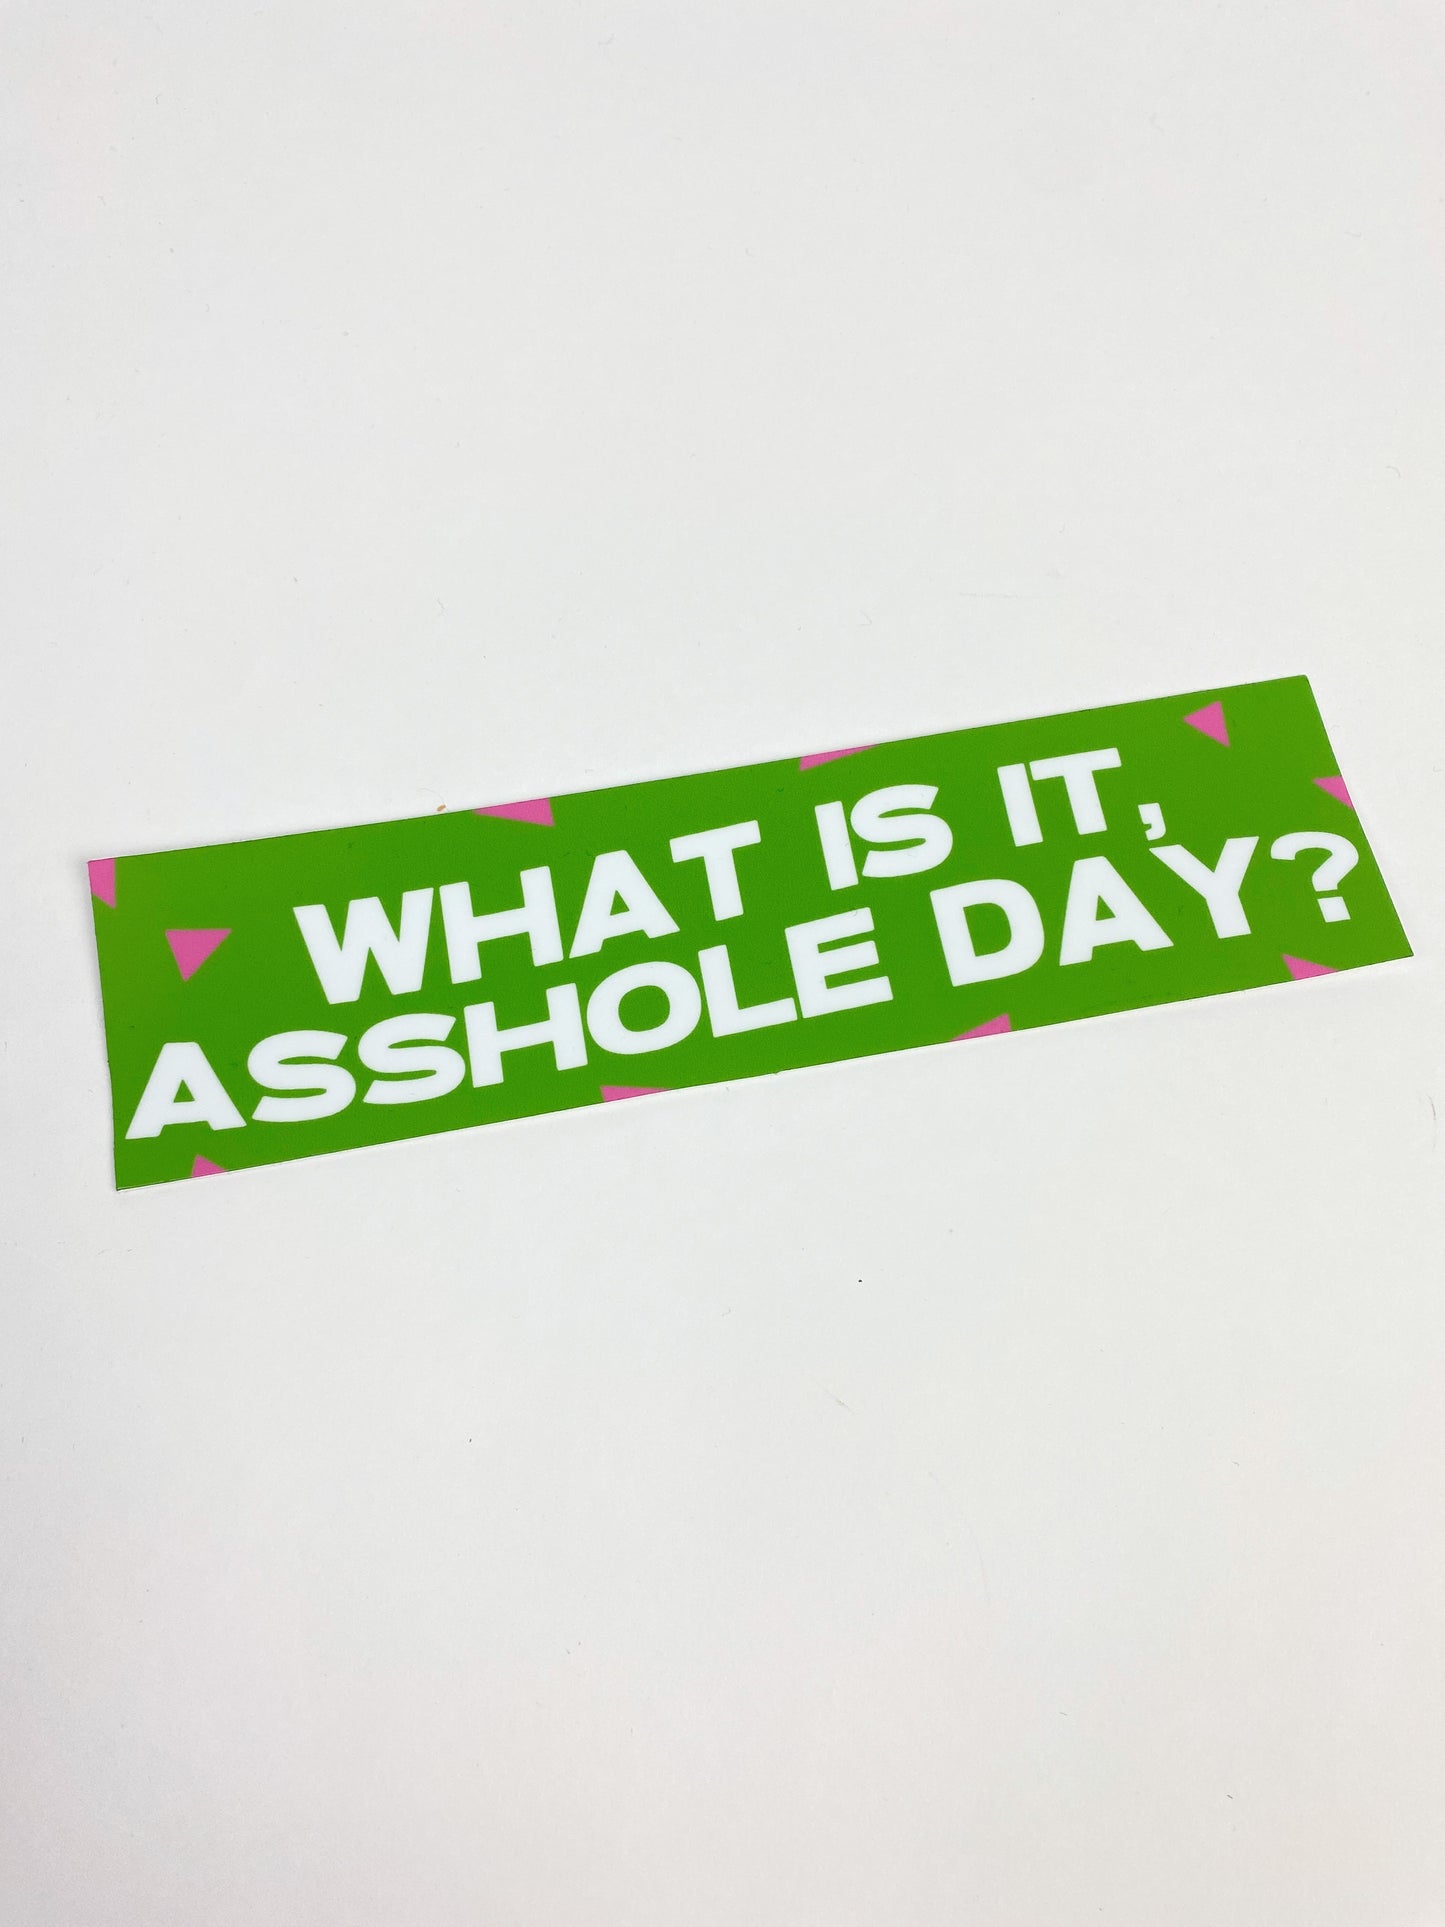 10 Things I Hate About You What Is It, A**hole Day? Bumper Sticker - Totally Good Time